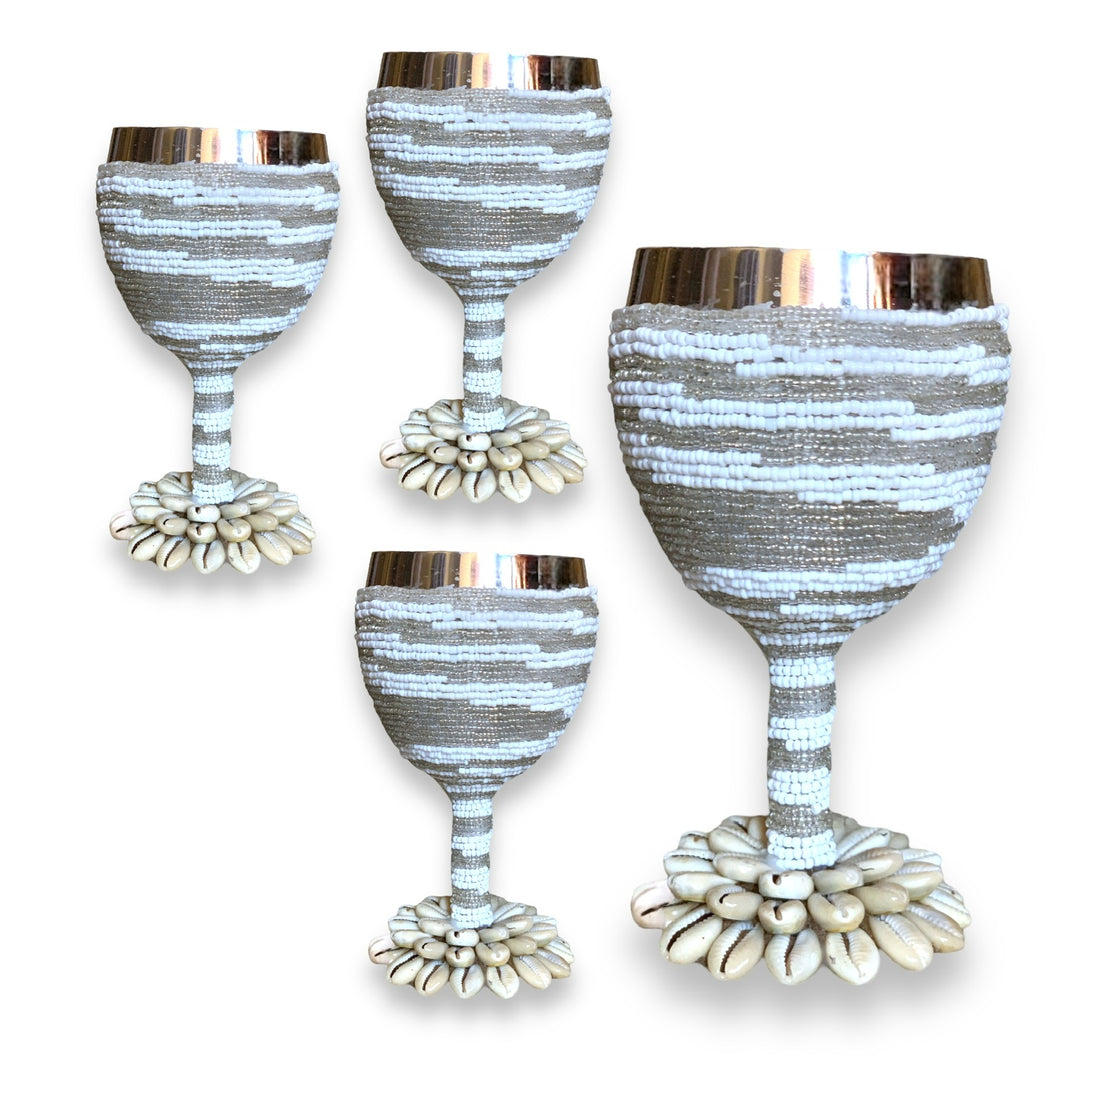 Stainless Steel Wine Goblets - Silver/White